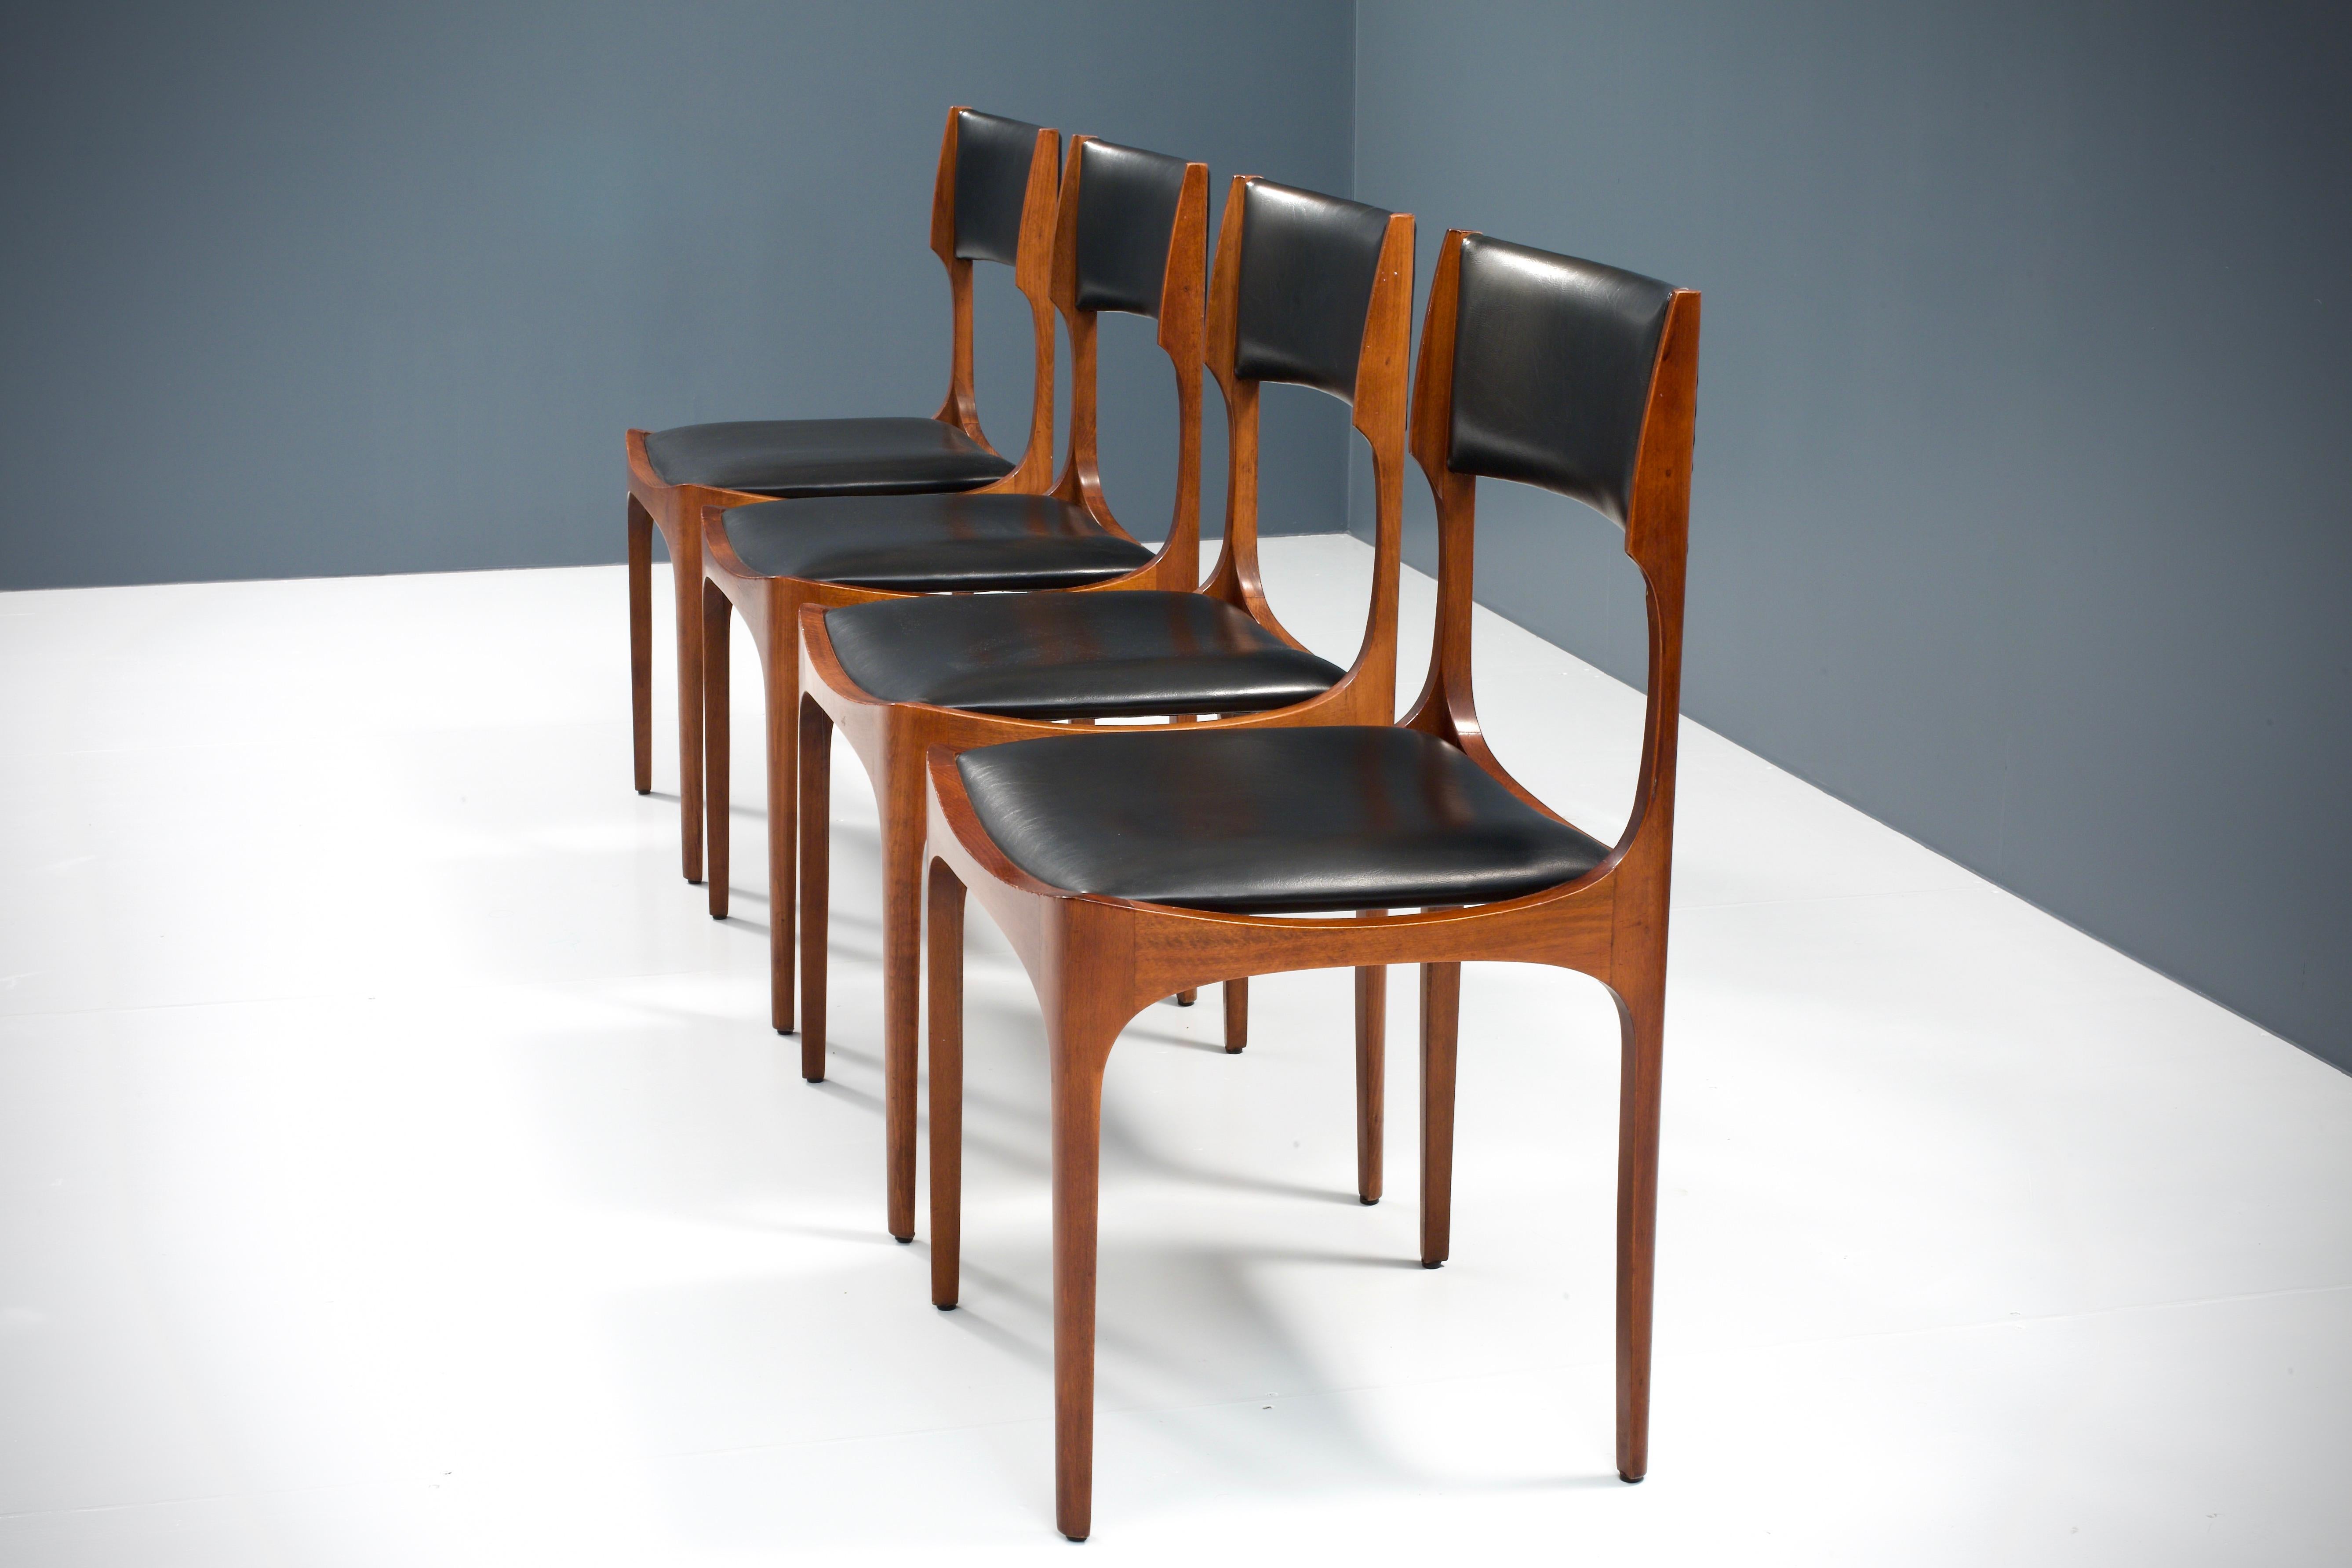 Italian Set of Four Dining Chairs in Oak and Faux Leather by Giuseppe Gibelli, 1962